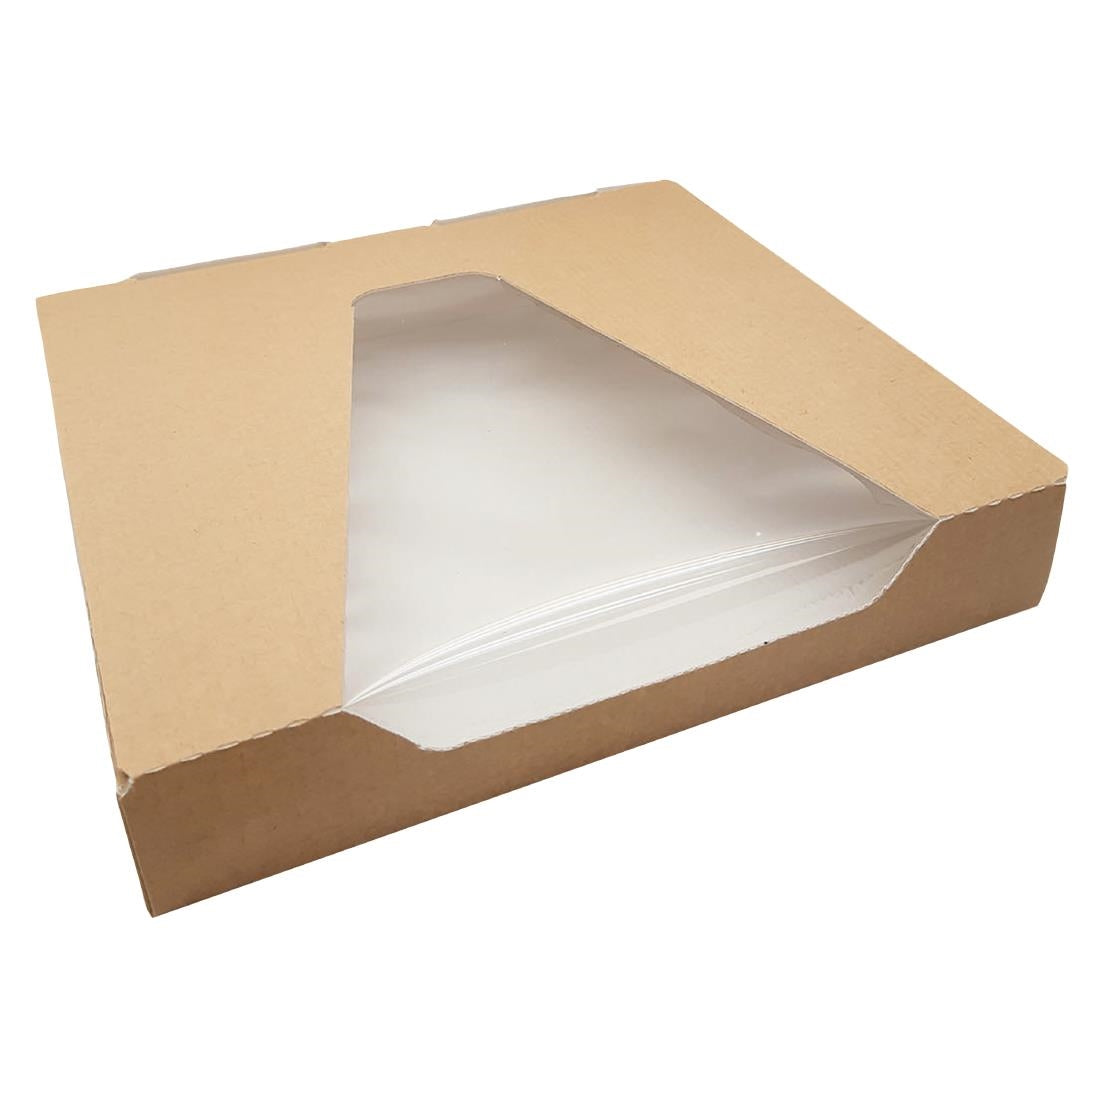 HP958 Huhtamaki Taste Quarter Pizza Box with Window and Vents (Pack of 325)